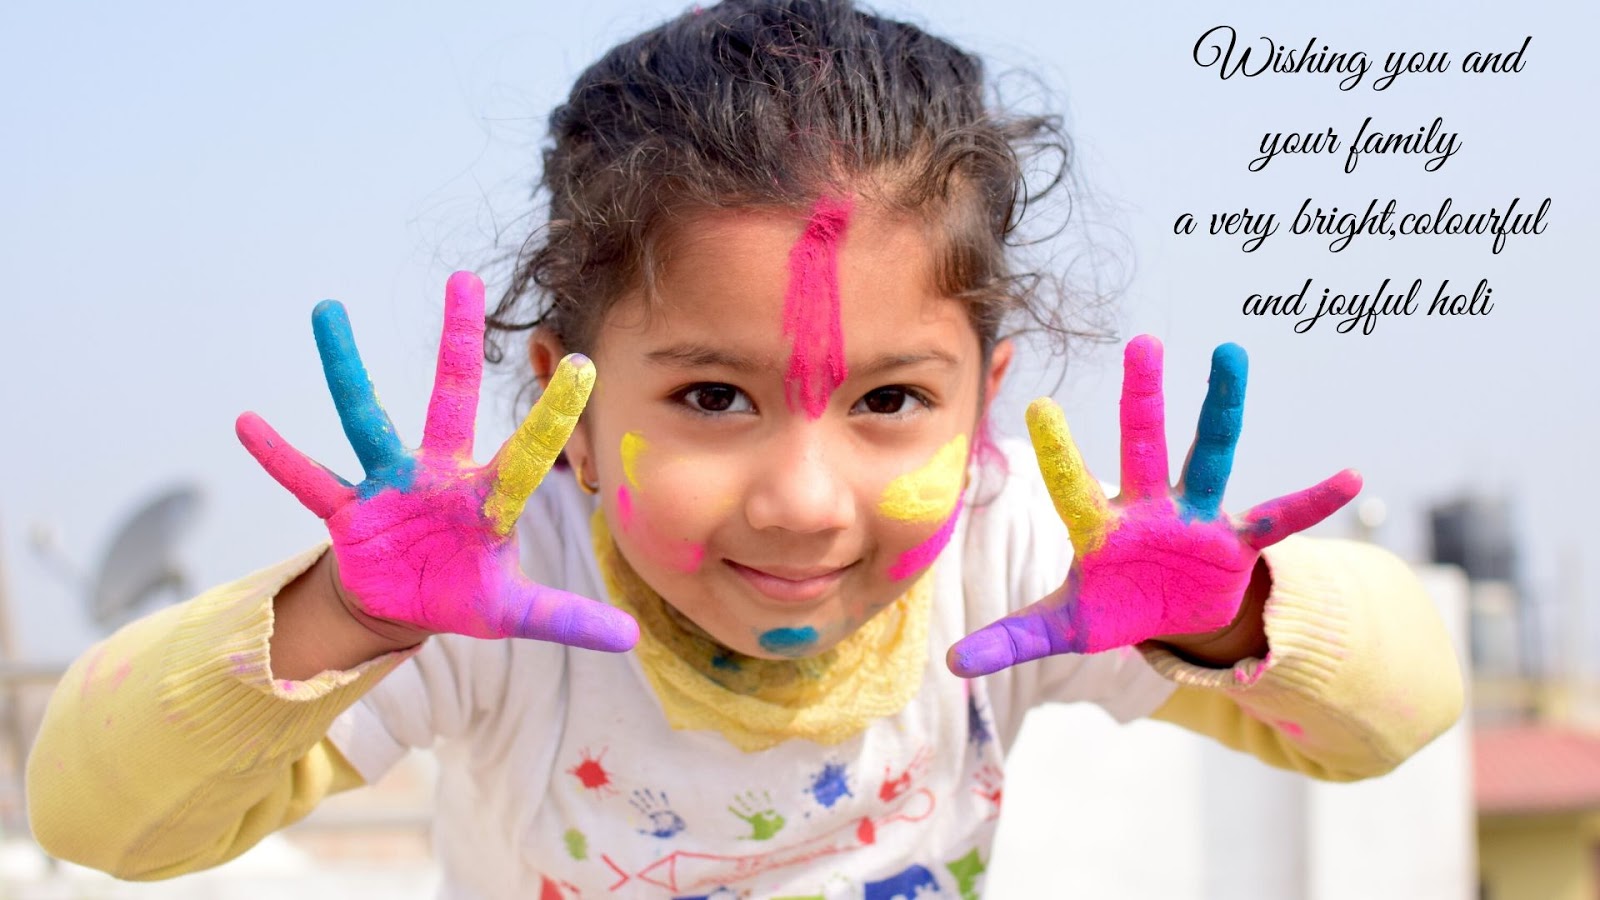 Happy Holi Wallpaper - Messages Whatsapp Status Happy Holi Wishes 2019 , HD Wallpaper & Backgrounds